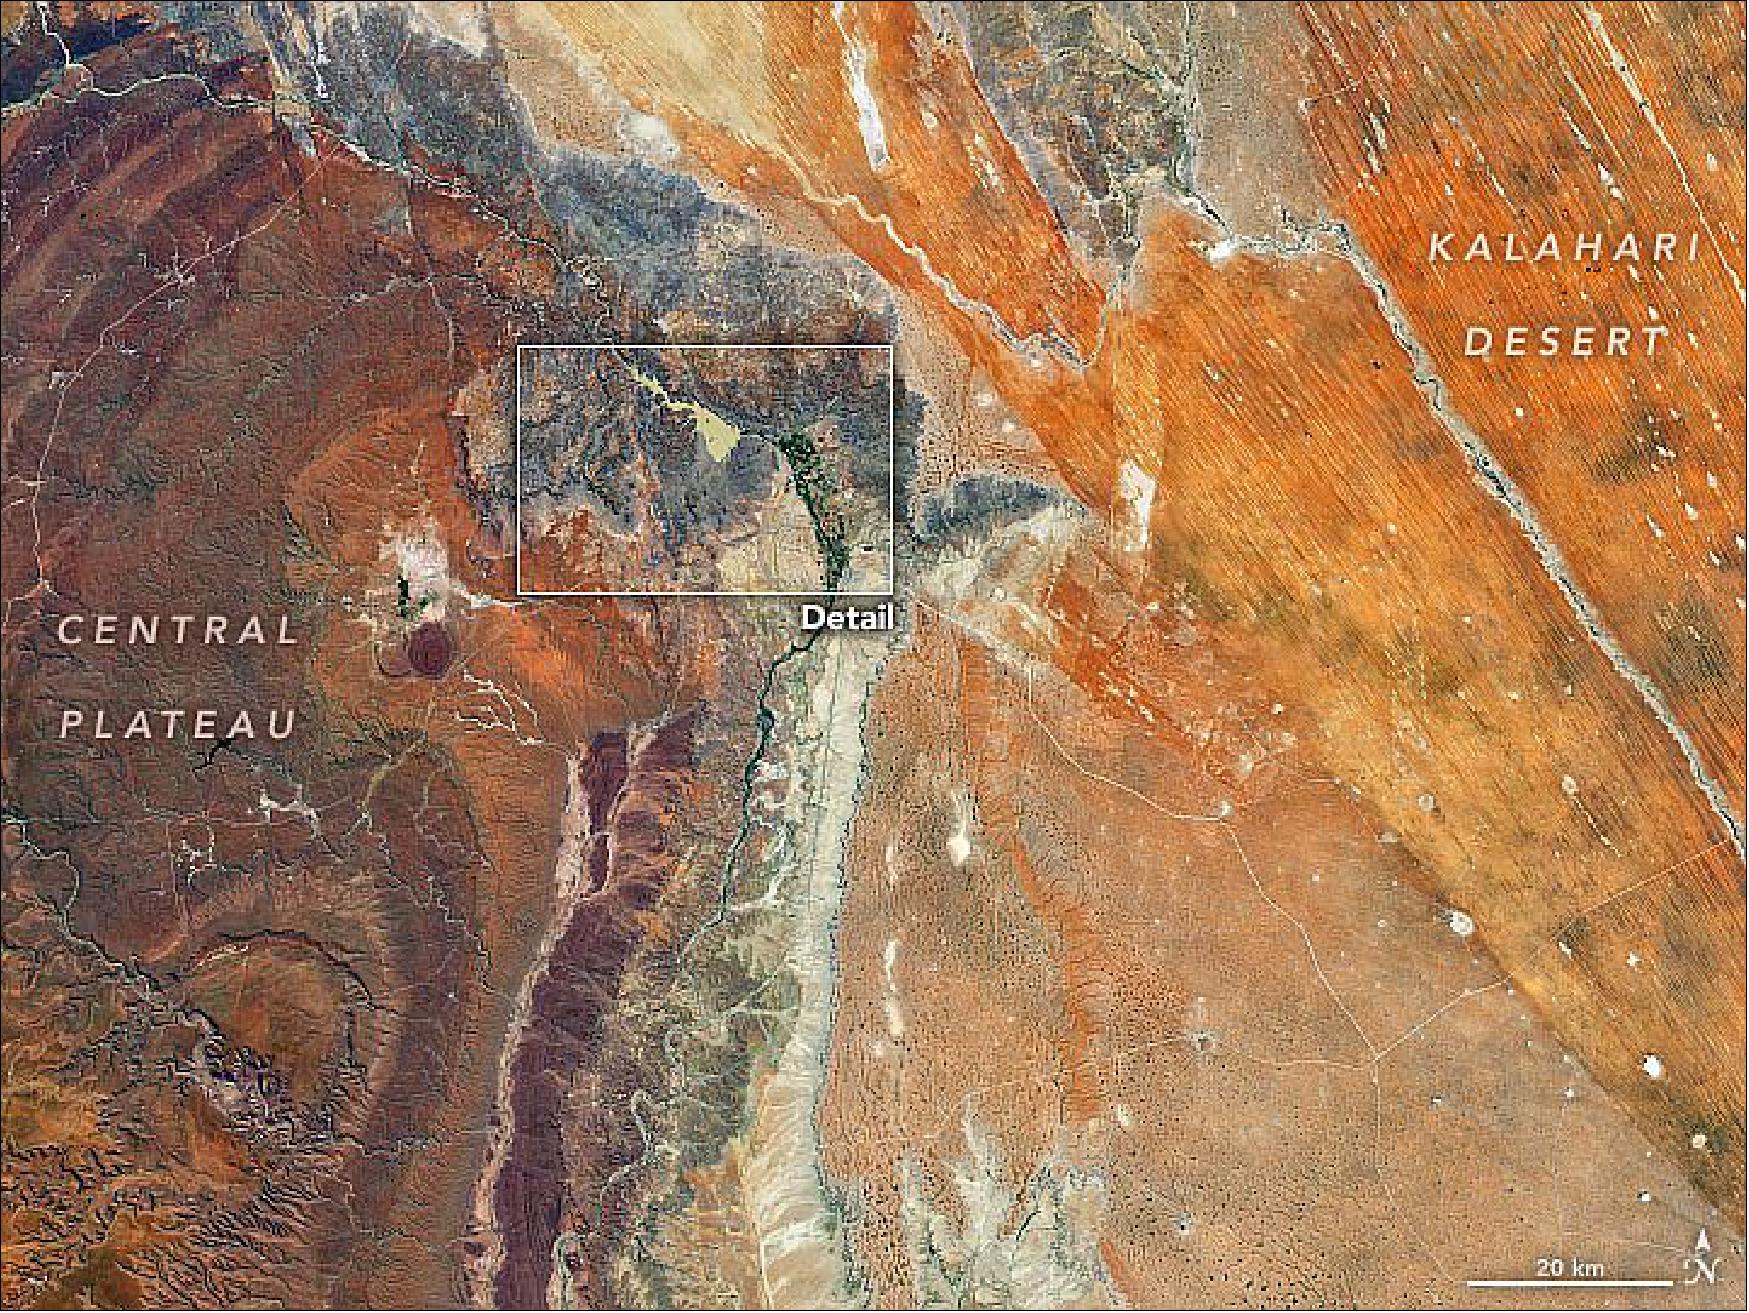 Figure 70: Detail map of Namibia. This image shows the convergence of two contrasting geologic regions near the town of Mariental in south-central Namibia. The semi-arid sandy savannah of the Kalahari Desert lies to the east of the town, while the rocky plains of the Central Plateau are located to the west. The image was acquired on May 9, 2020, by the Operational Land Imager (OLI) on Landsat-8 (image credit: NASA Earth Observatory, images by Joshua Stevens, using Landsat data from the U.S. Geological Survey. Story by Kasha Patel)